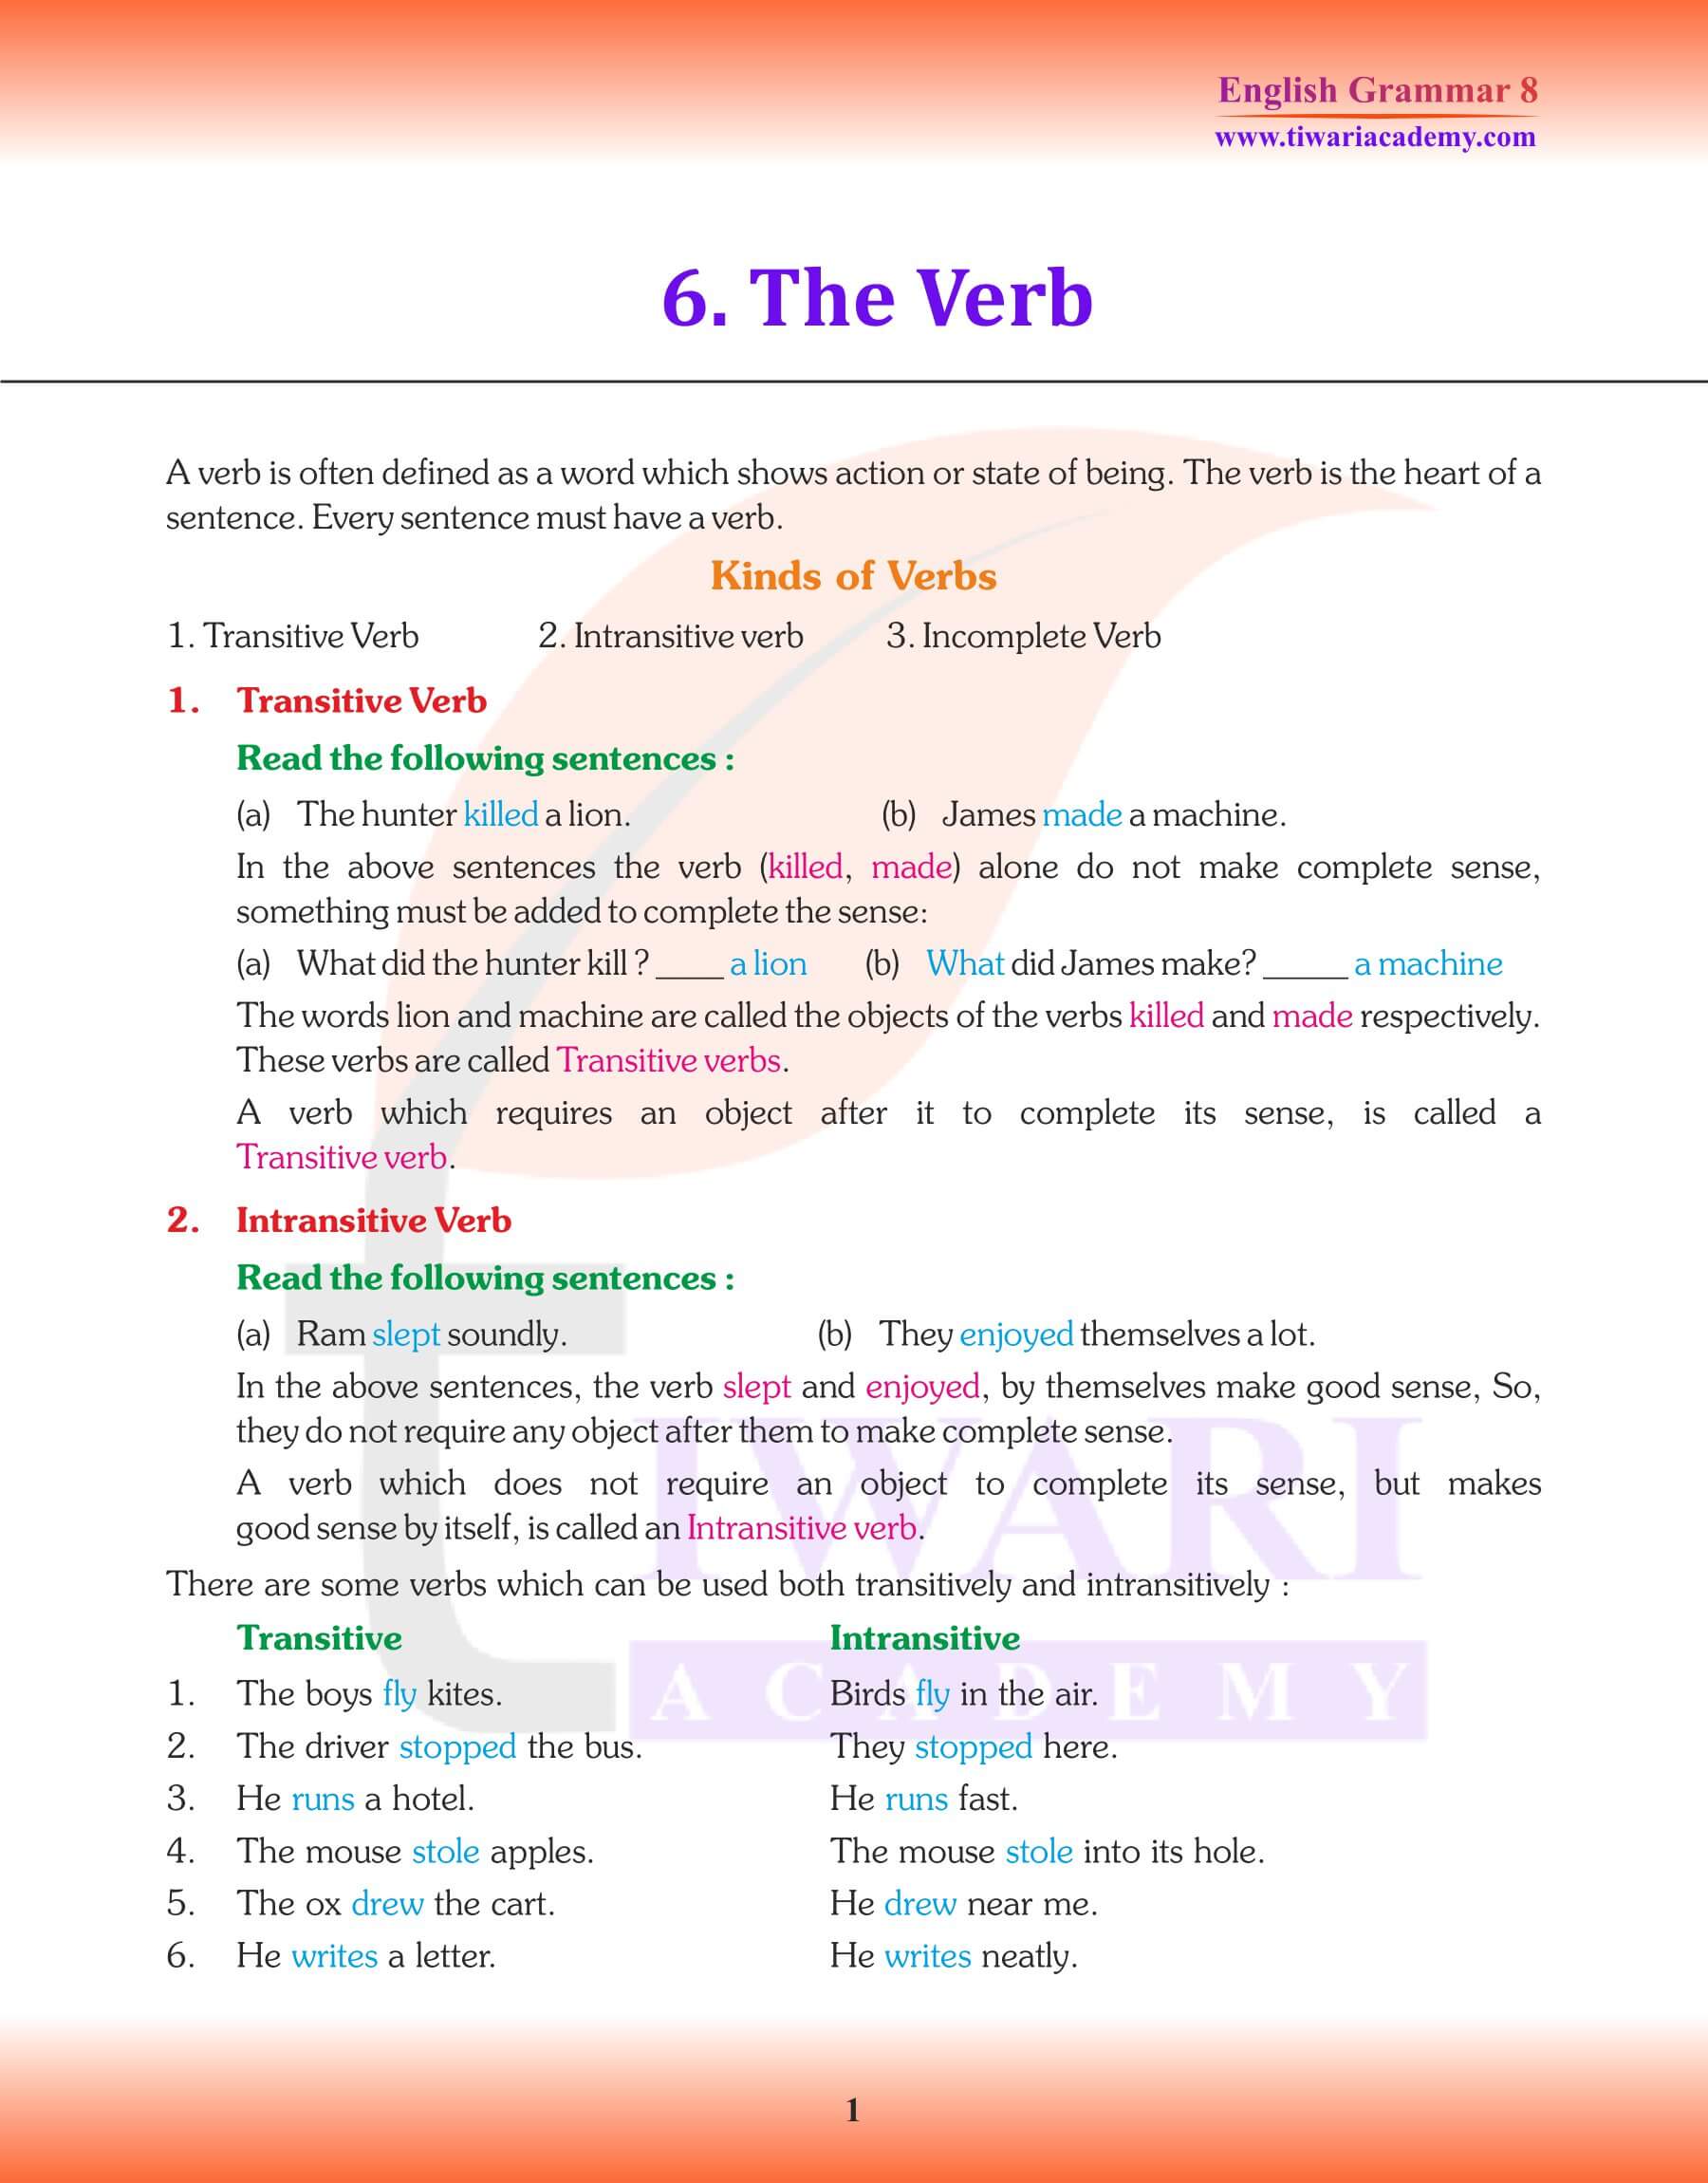 Class 8 English Grammar Chapter 6 The Verb Study Material